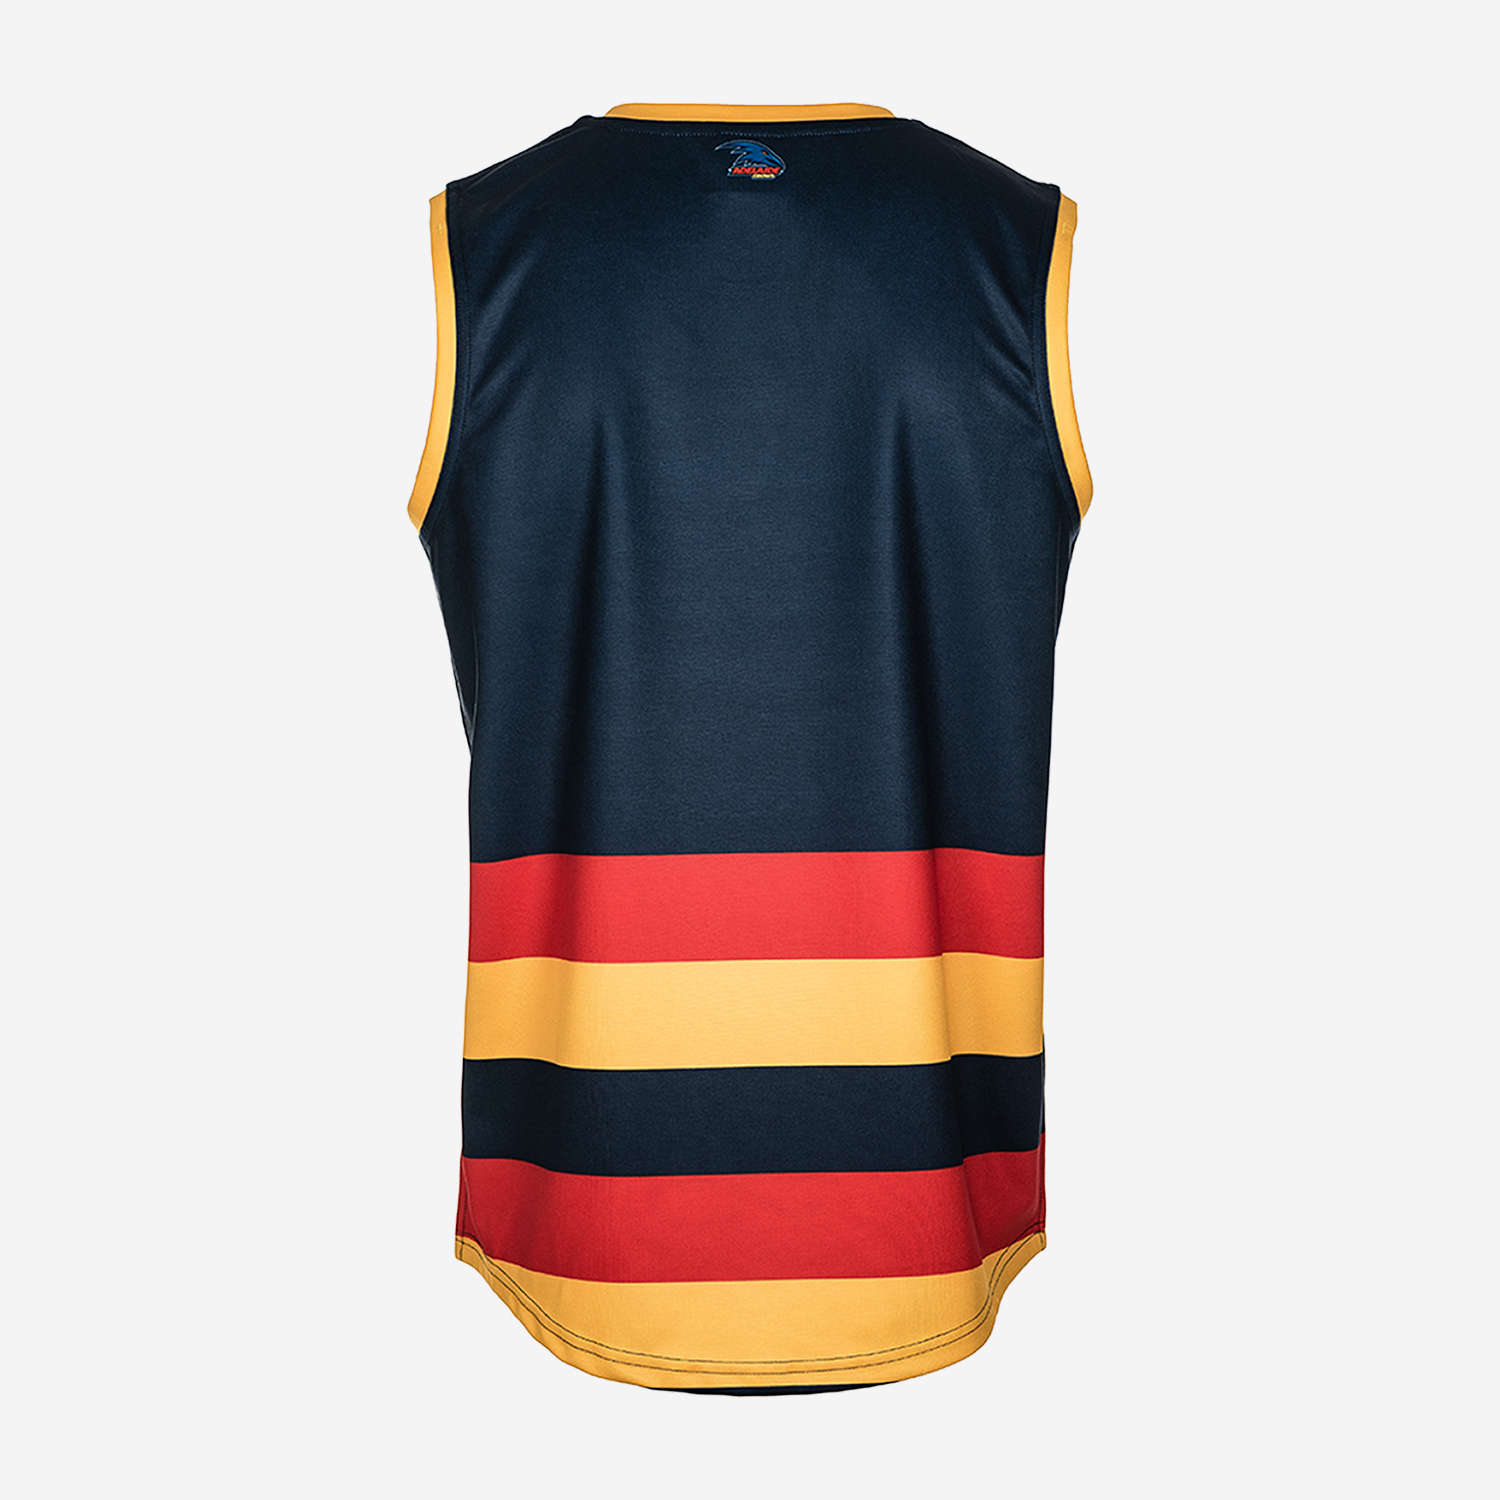 ADELAIDE CROWS AFL REPLICA ADULT GUERNSEY